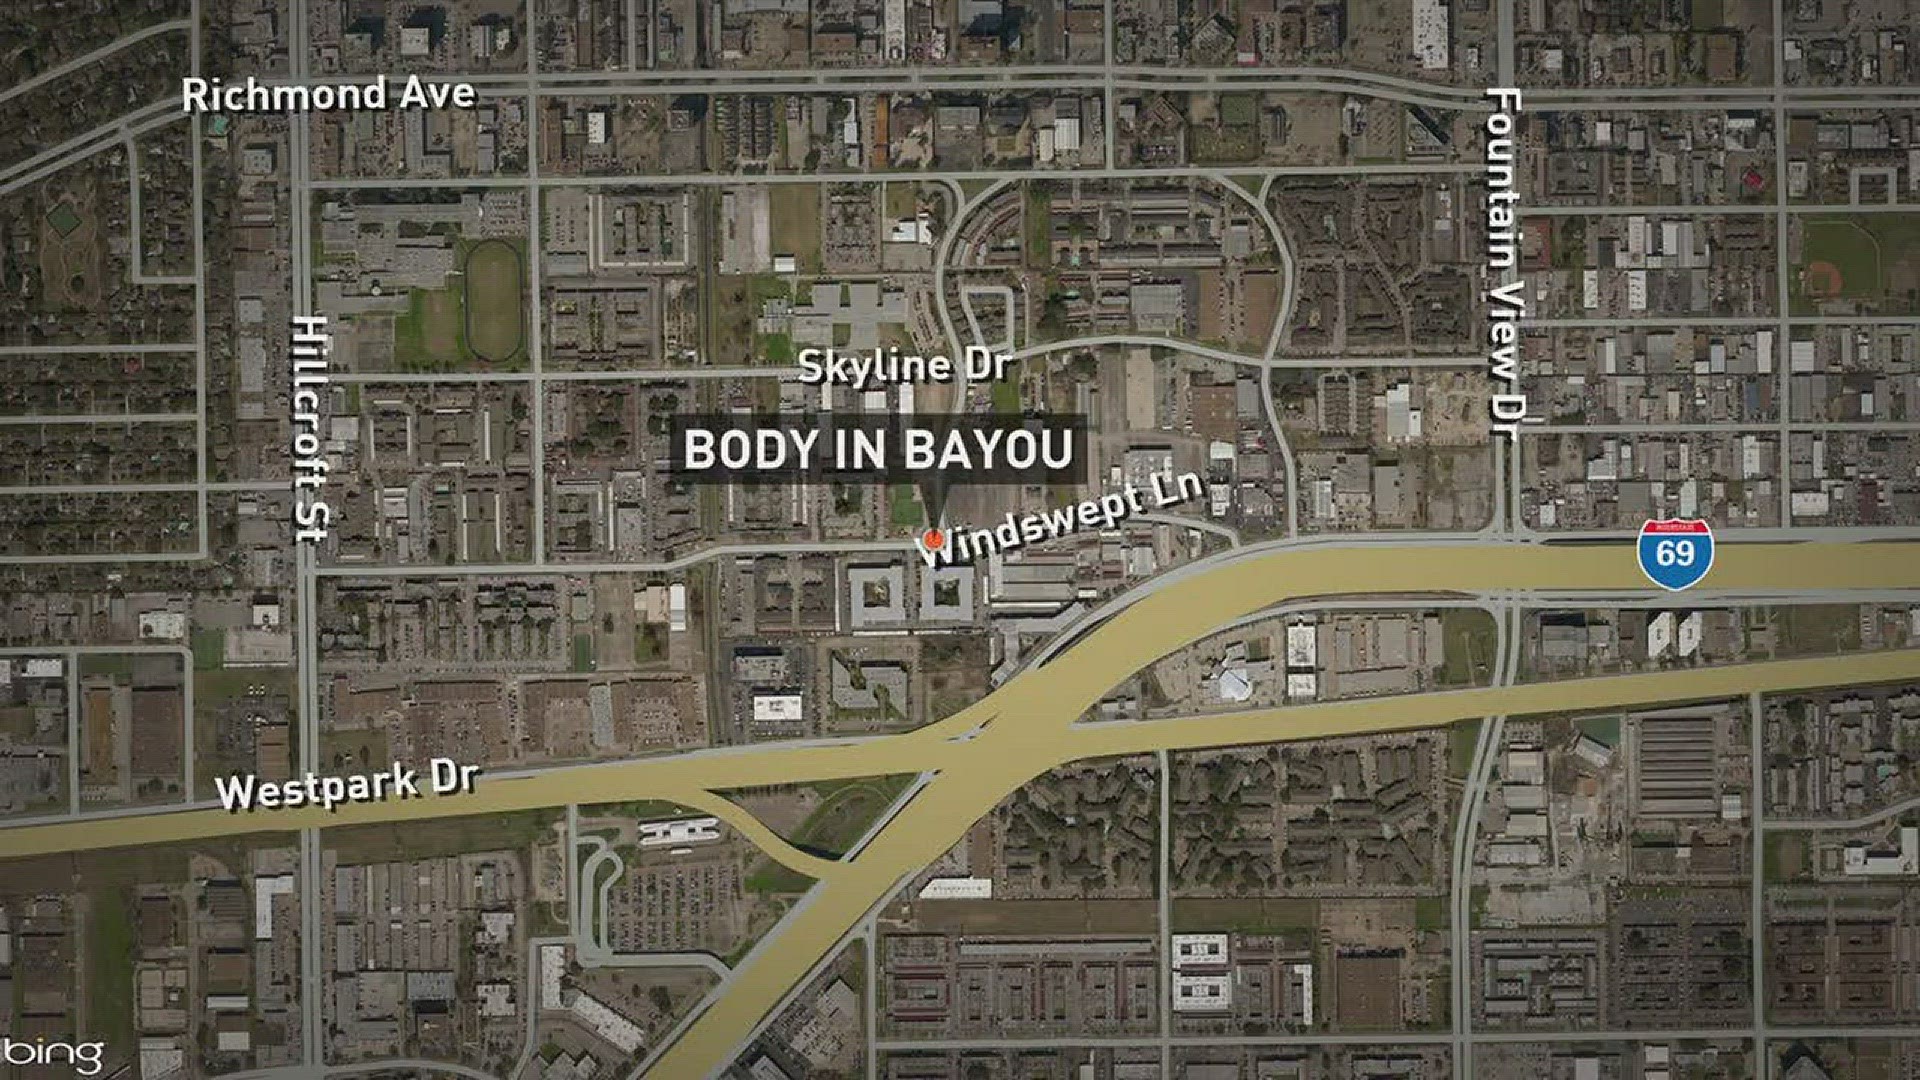 Police are investigating after a body was found in a bayou in southwest Houston Saturday.